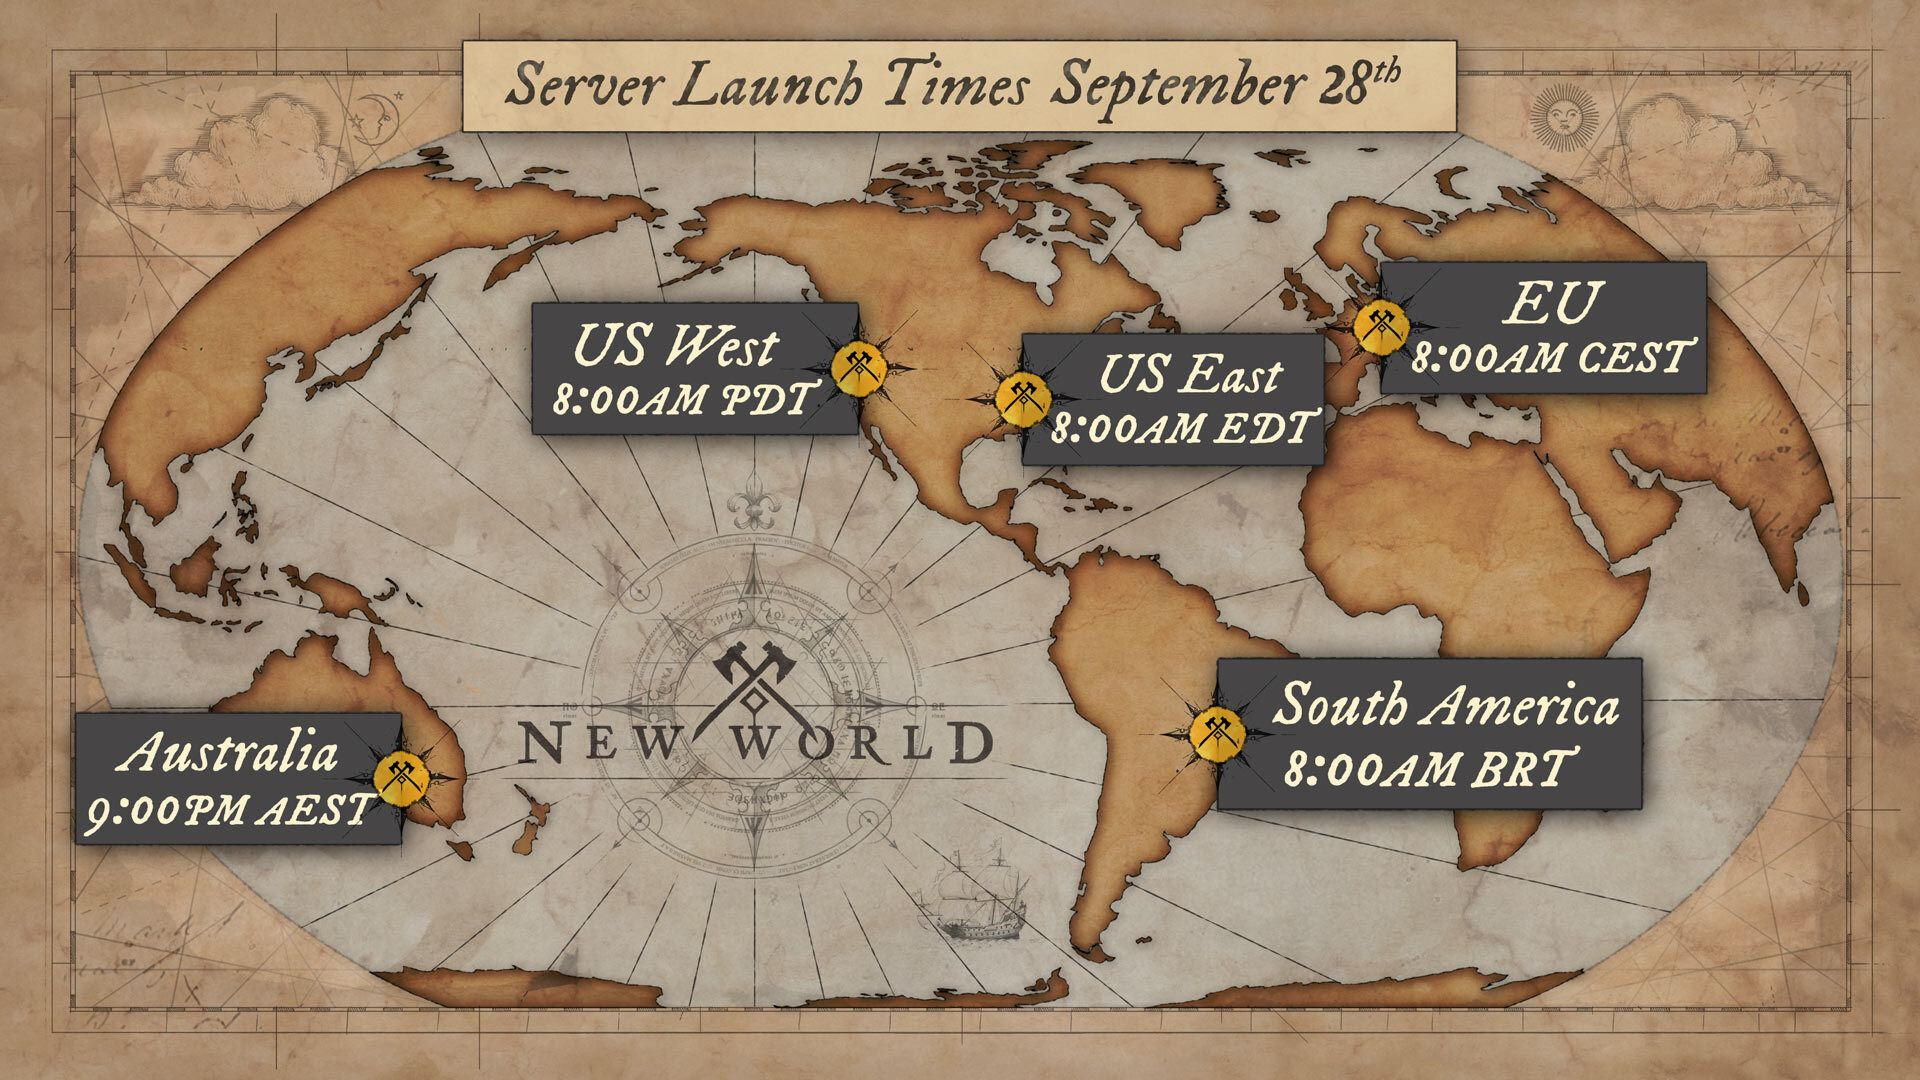 New World Launch Times